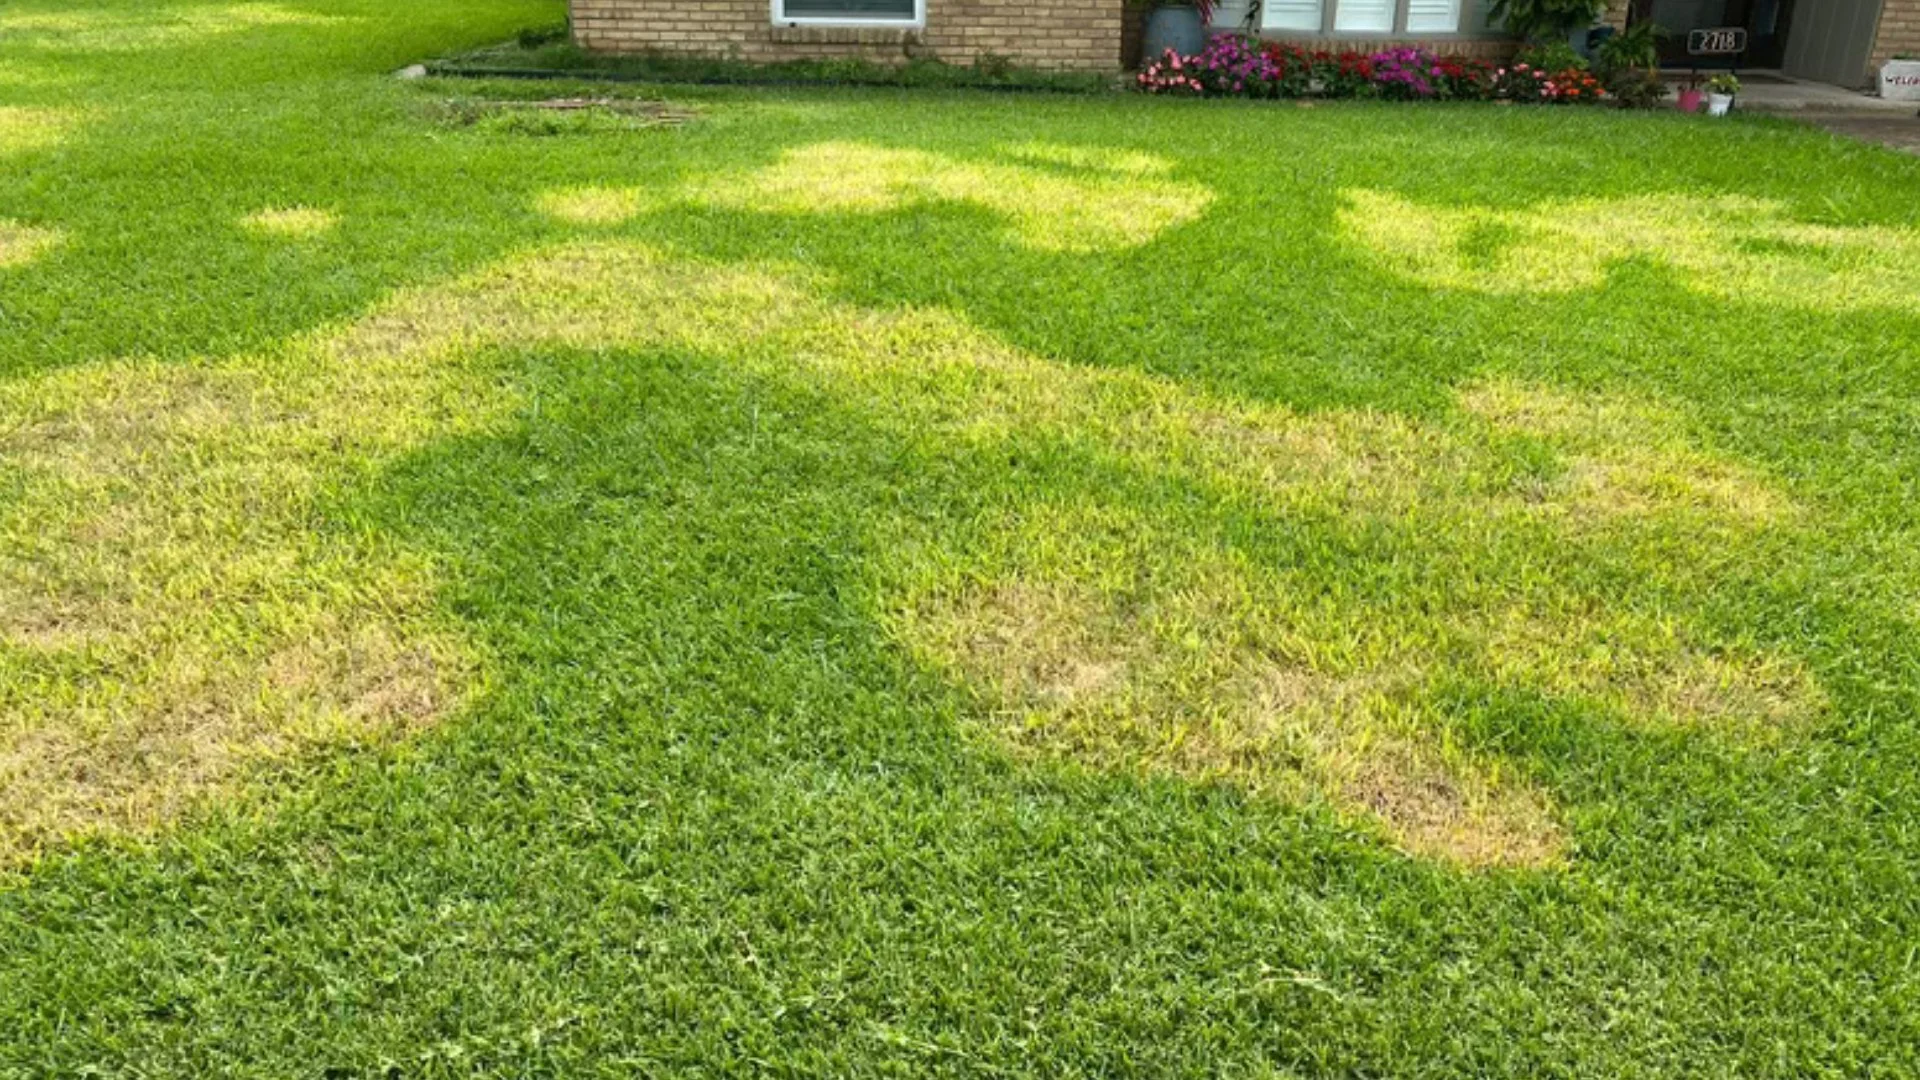 Take-All Root Rot Is a Lawn Disease You Shouldn't Underestimate!